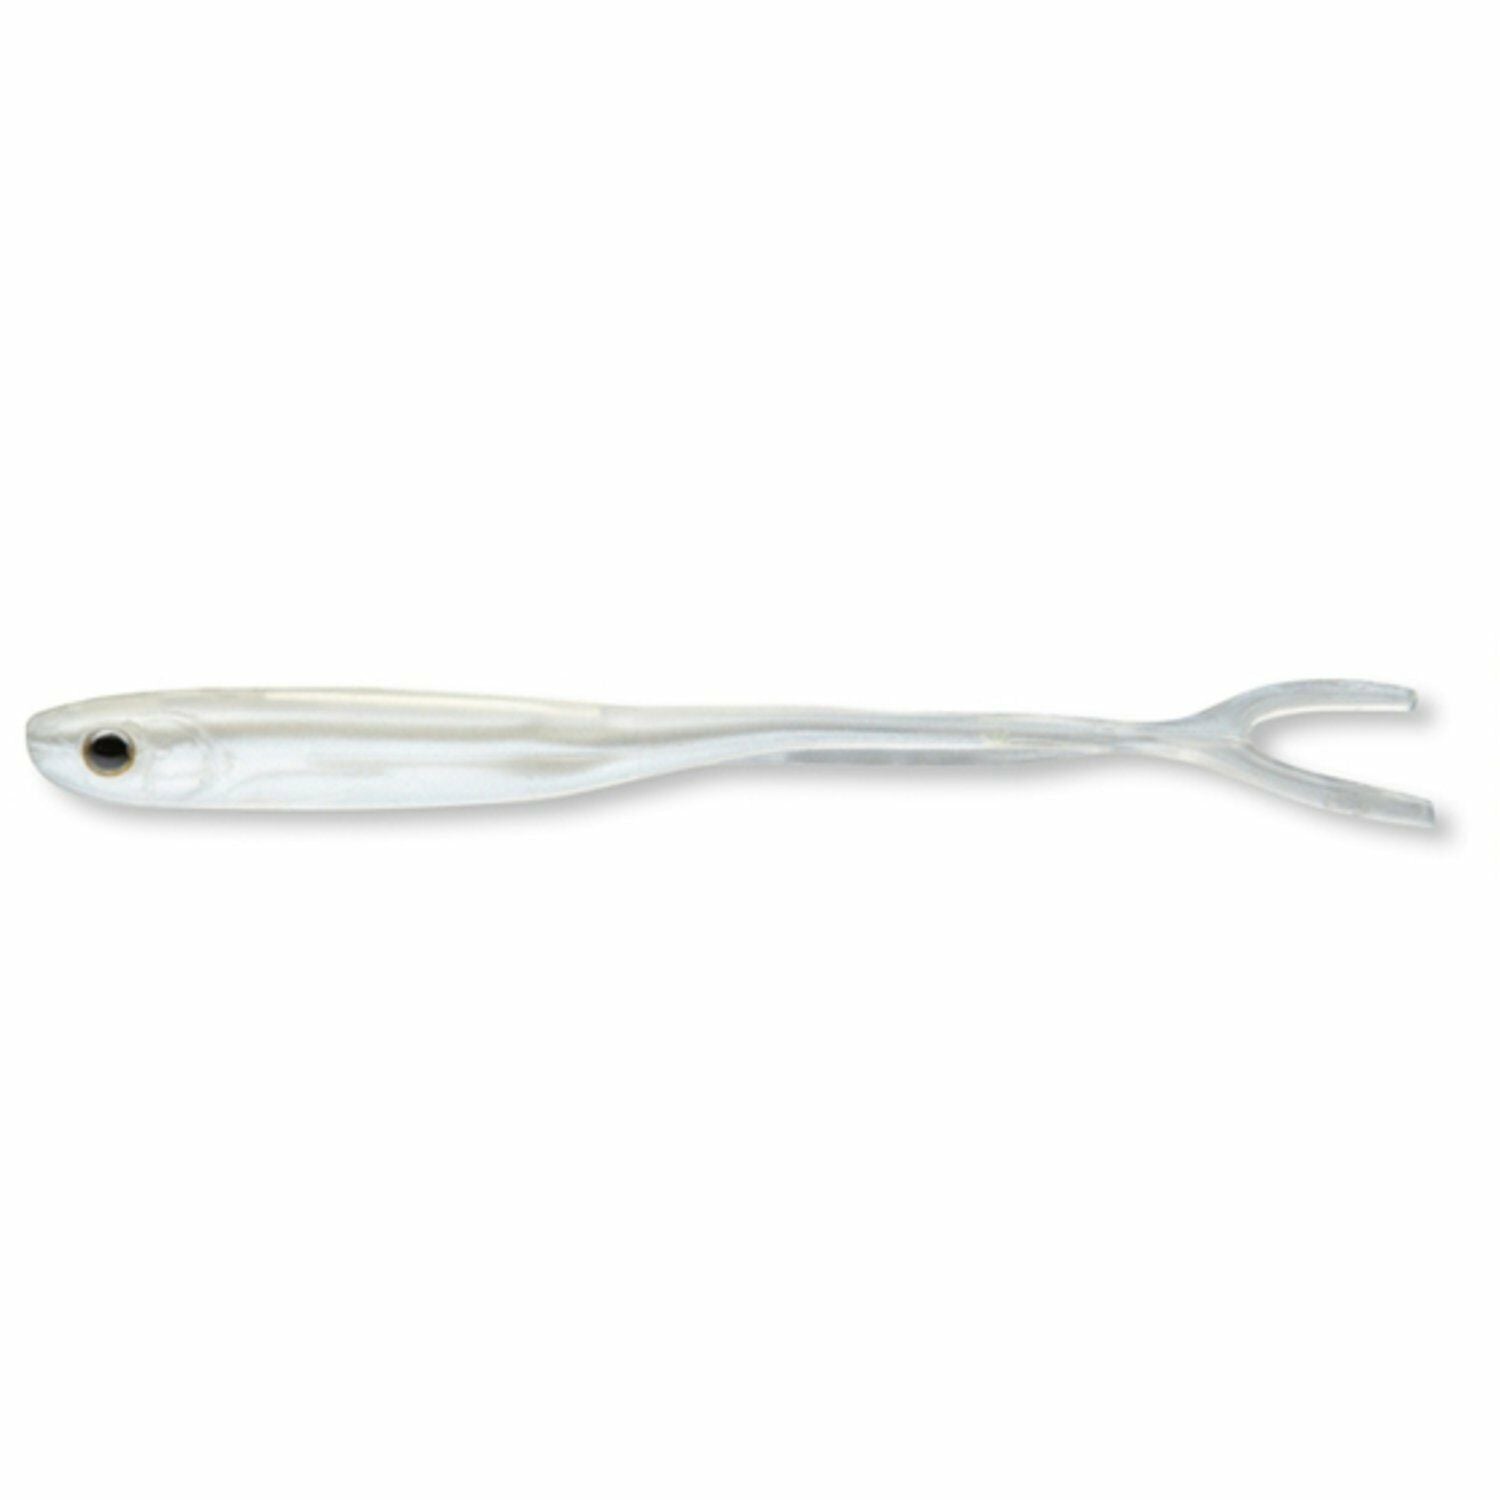 Cormoran K-DON Double Tail S3 Soft Plastic Fishing Lures 5 Per Pack